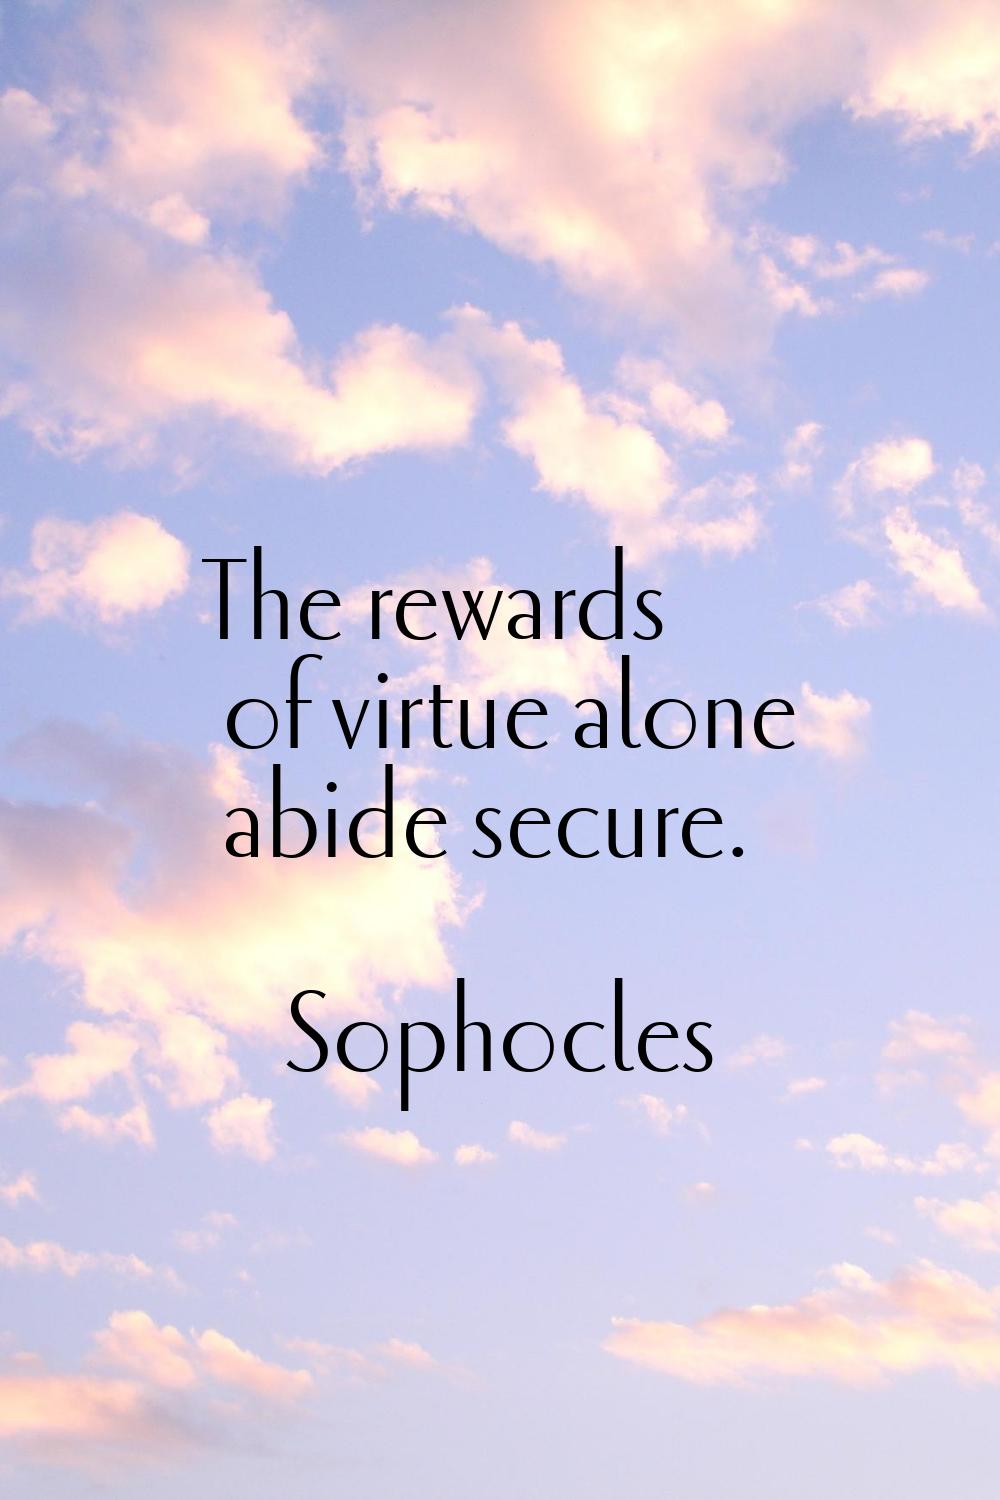 The rewards of virtue alone abide secure.